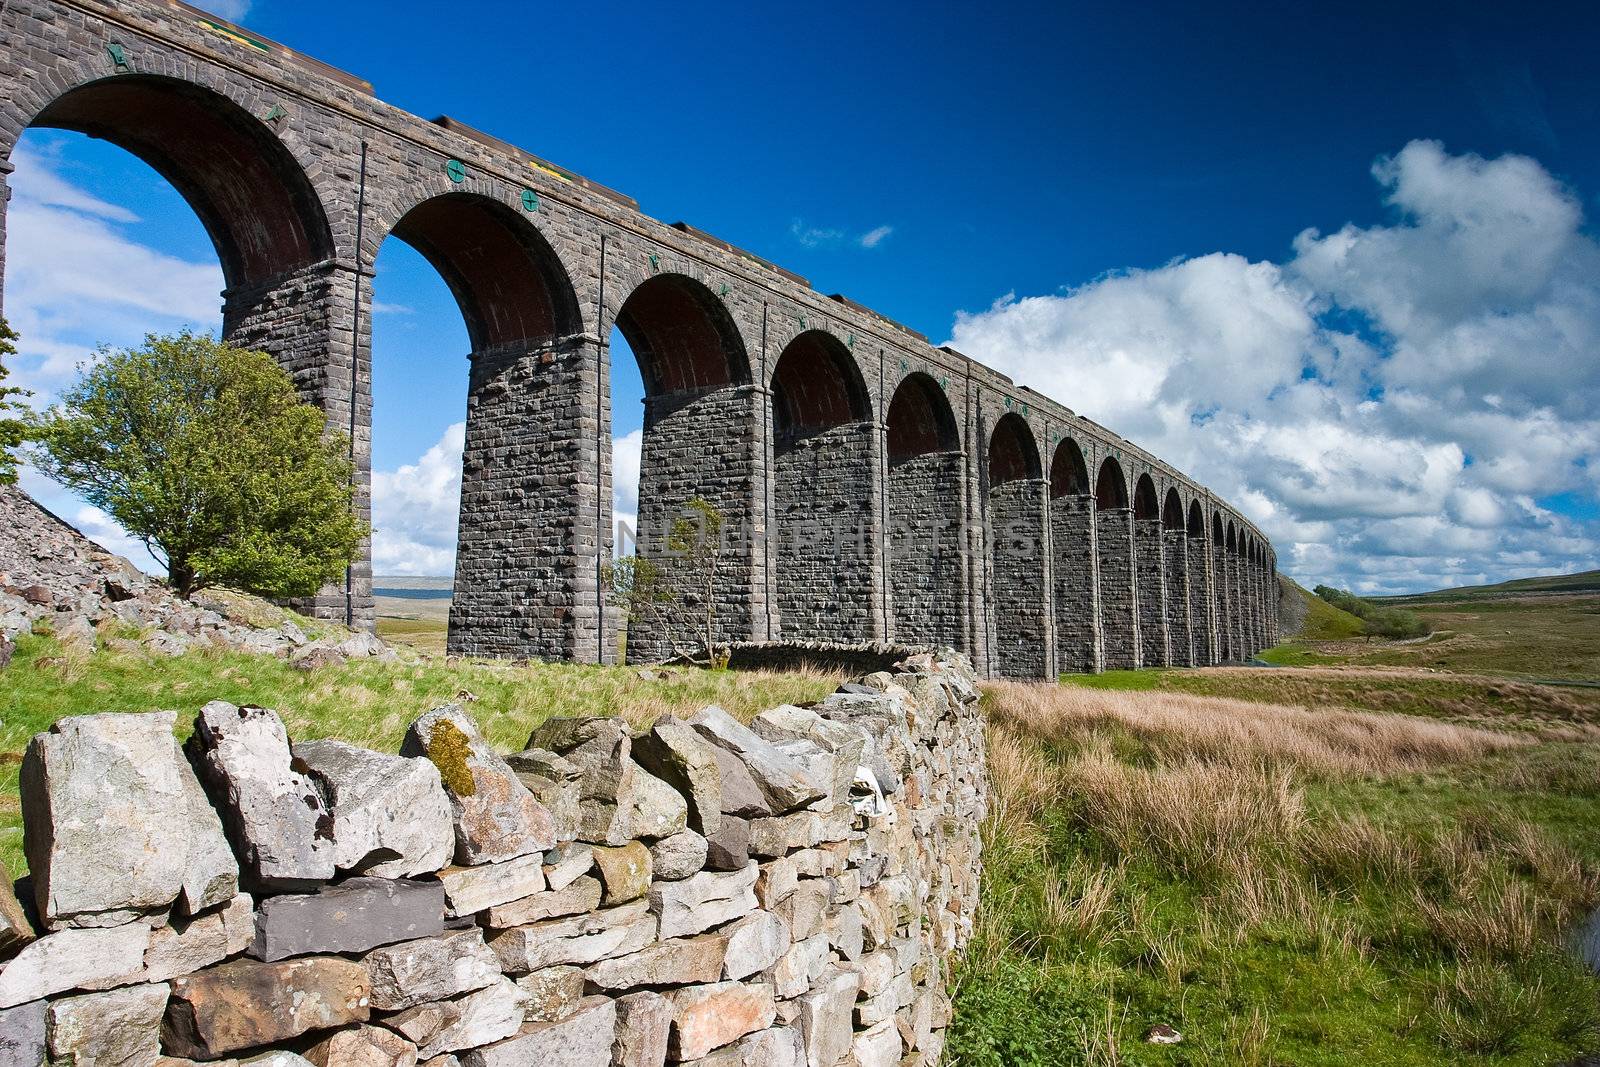 Famous Ribblehead viaduct in Yorkshire Dales in Great Britain